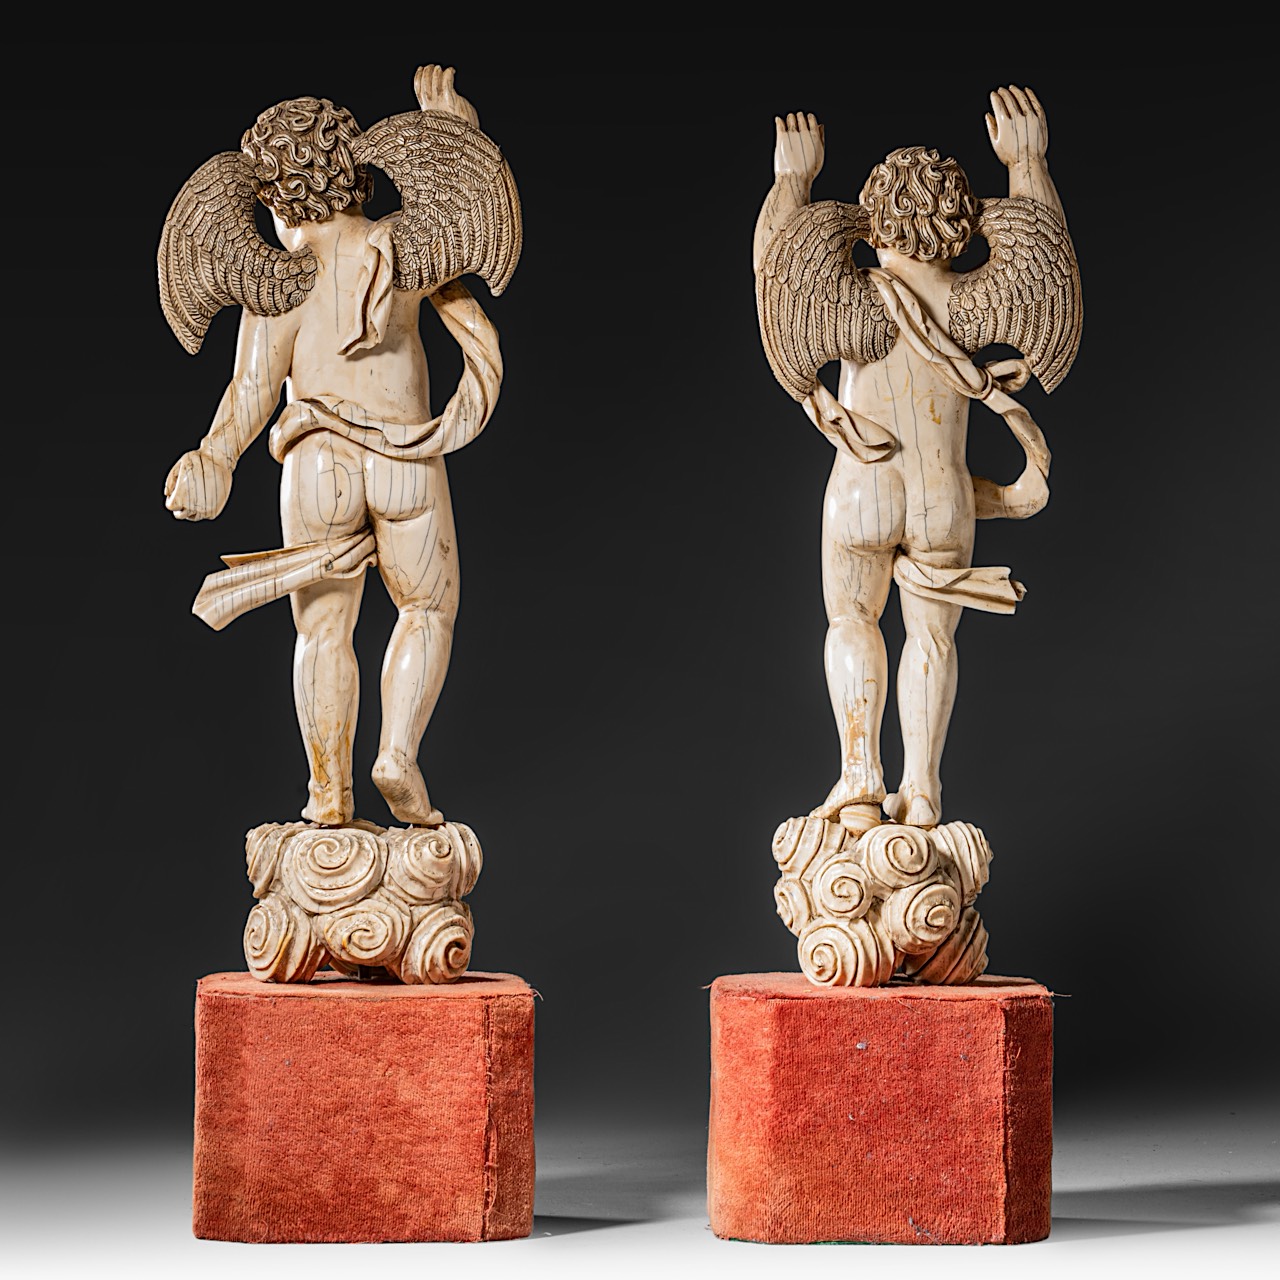 A pair of 17thC ivory angels, probably Indo-Portuguese, H (figures) 38,5 cm - total H 49 cm / 2862 - - Image 5 of 7